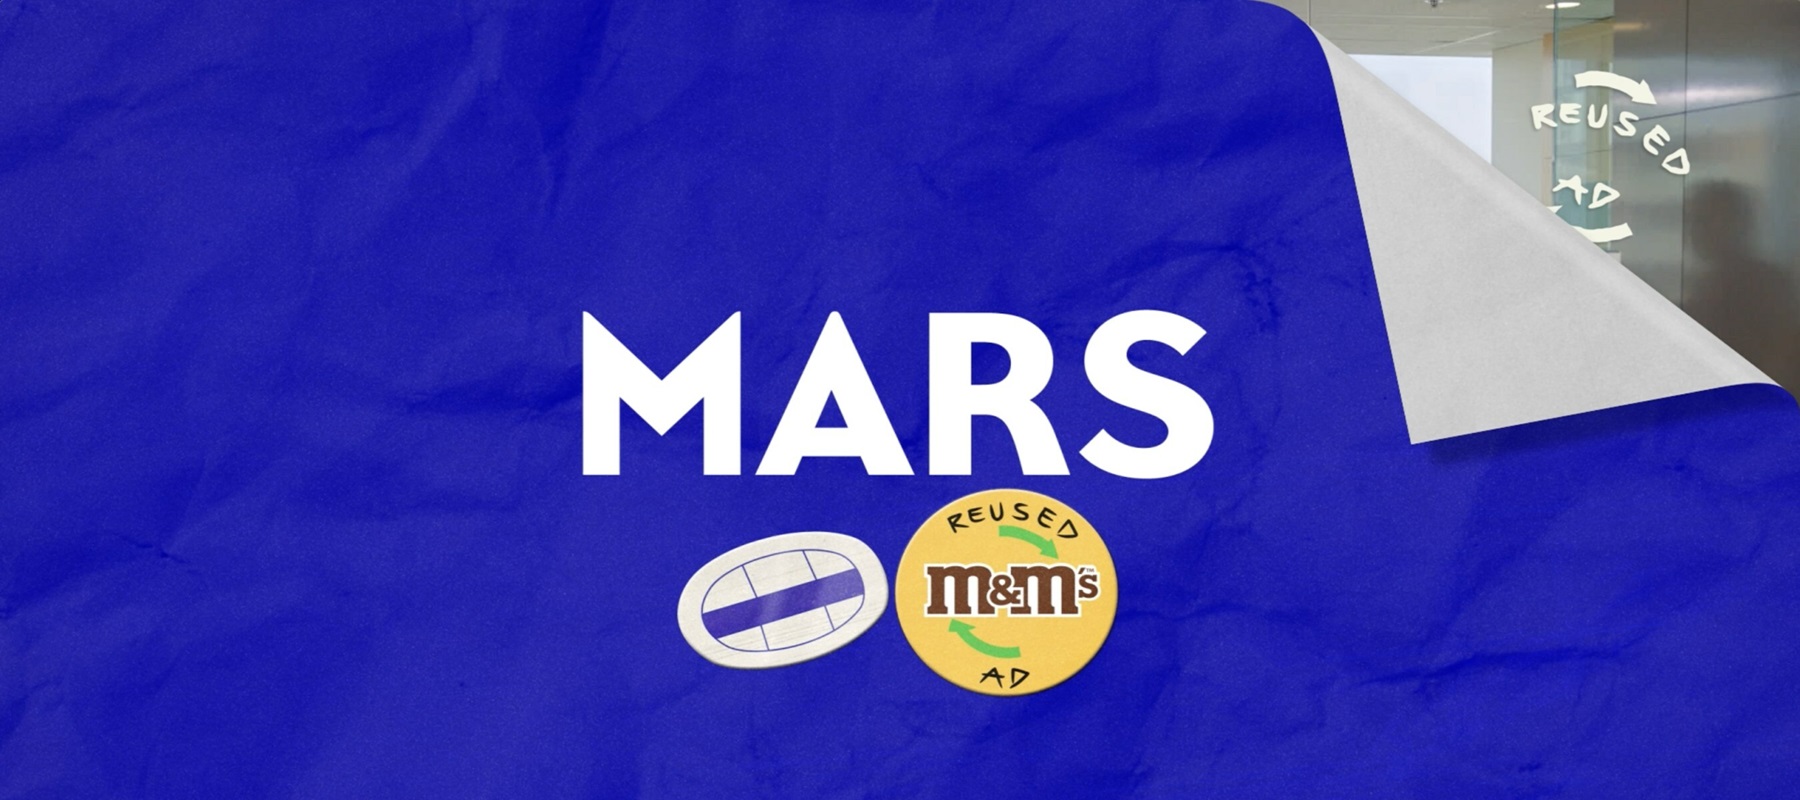 Mars revives old ads to engage public into climate action